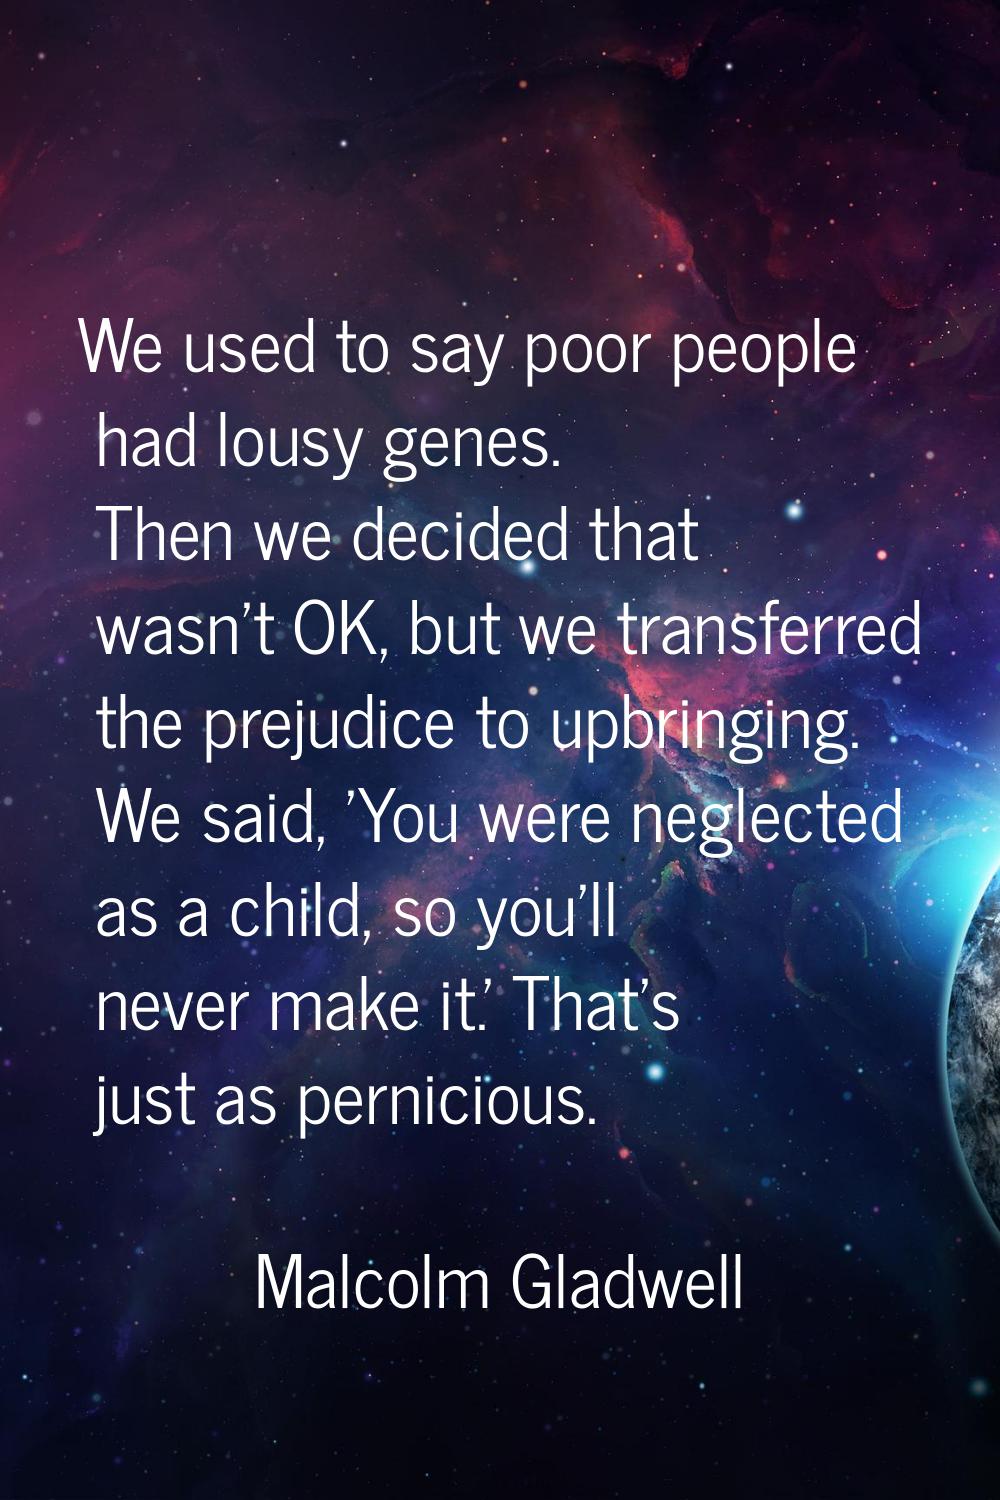 We used to say poor people had lousy genes. Then we decided that wasn't OK, but we transferred the 